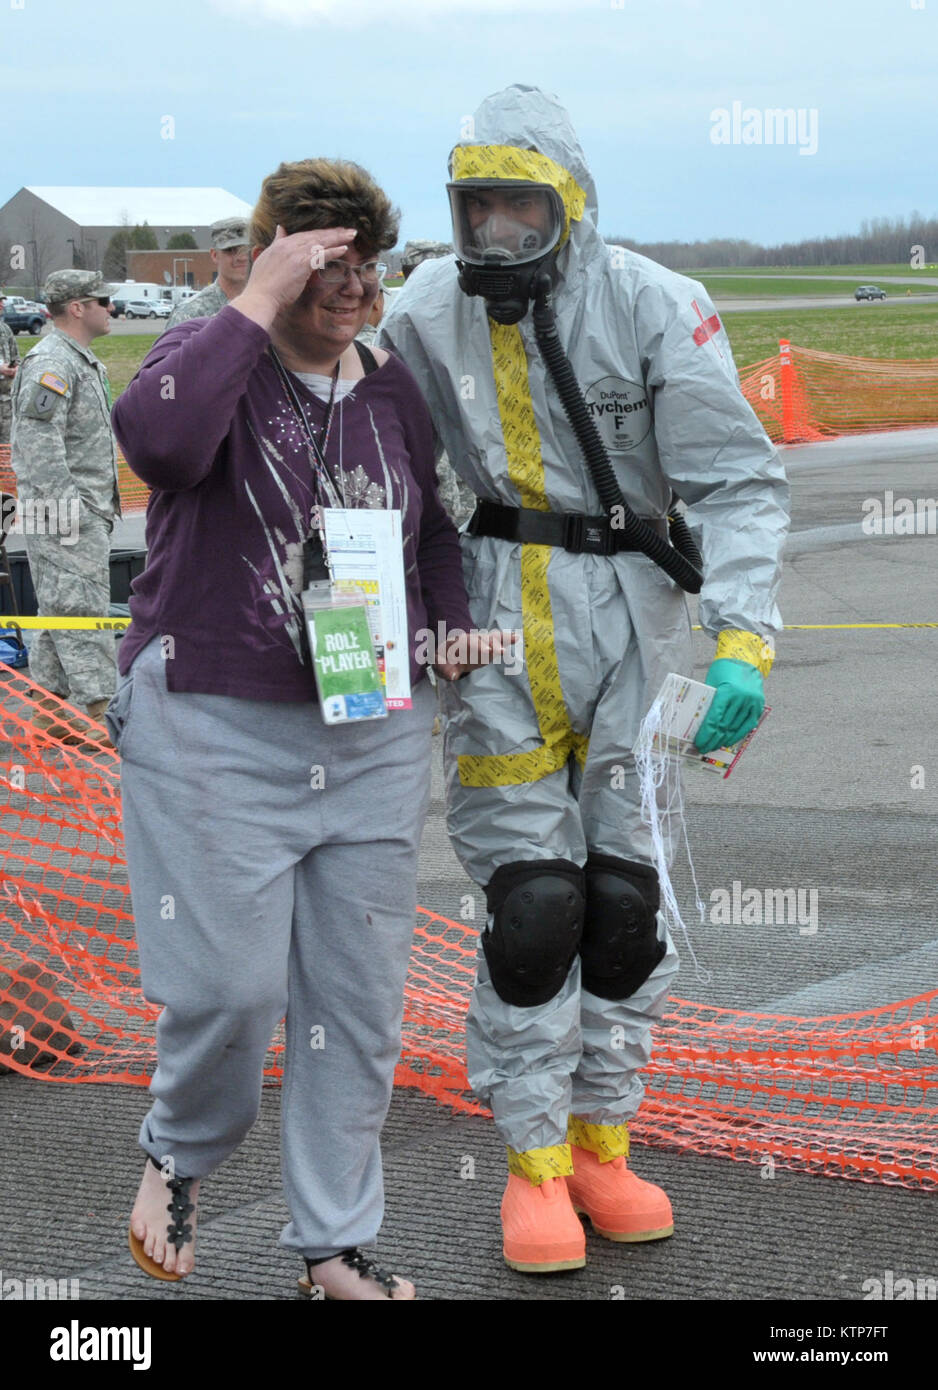 ORISKANY, N.Y. -- Staff Sgt. Lorenzo Rodriguez leads a patient to get medical help after triagining her in the &quot;hot zone&quot; during the FEMA II Homeland Response Force validation exercise at the New York State Preparedness Training Center on May 1, 2014. Lorenzo is assigned to the 109th Medical Group at Stratton Air National Guard Base, Scotia, N.Y., and is one of almost 50 New York Air National Guard medics who are participating in the exercise. (U.S. Air National Guard photo by Tech. Sgt. Catharine Schmidt/Released) Stock Photo